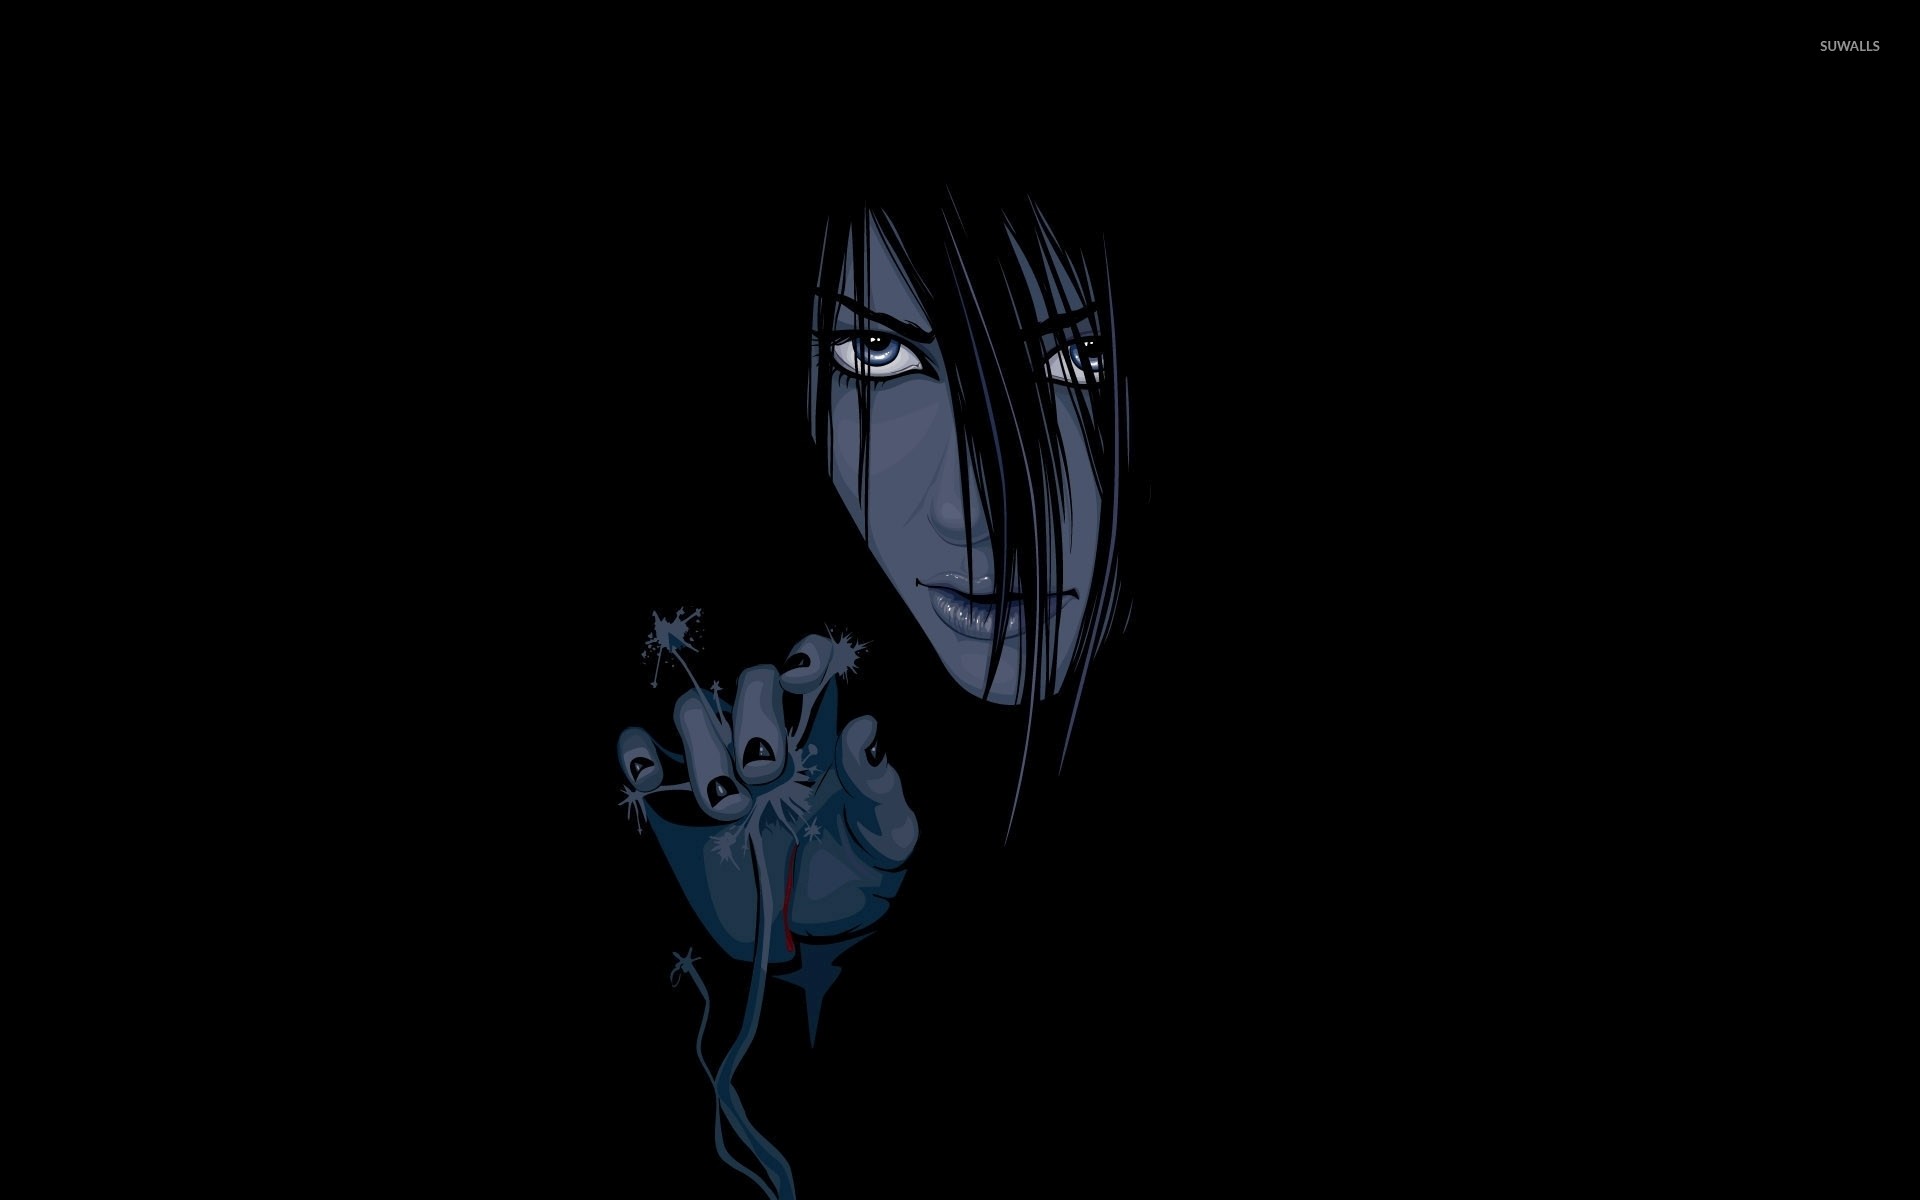 i made an orochimaru aesthetic wallpaper feel free to use this if you  want    rNaruto